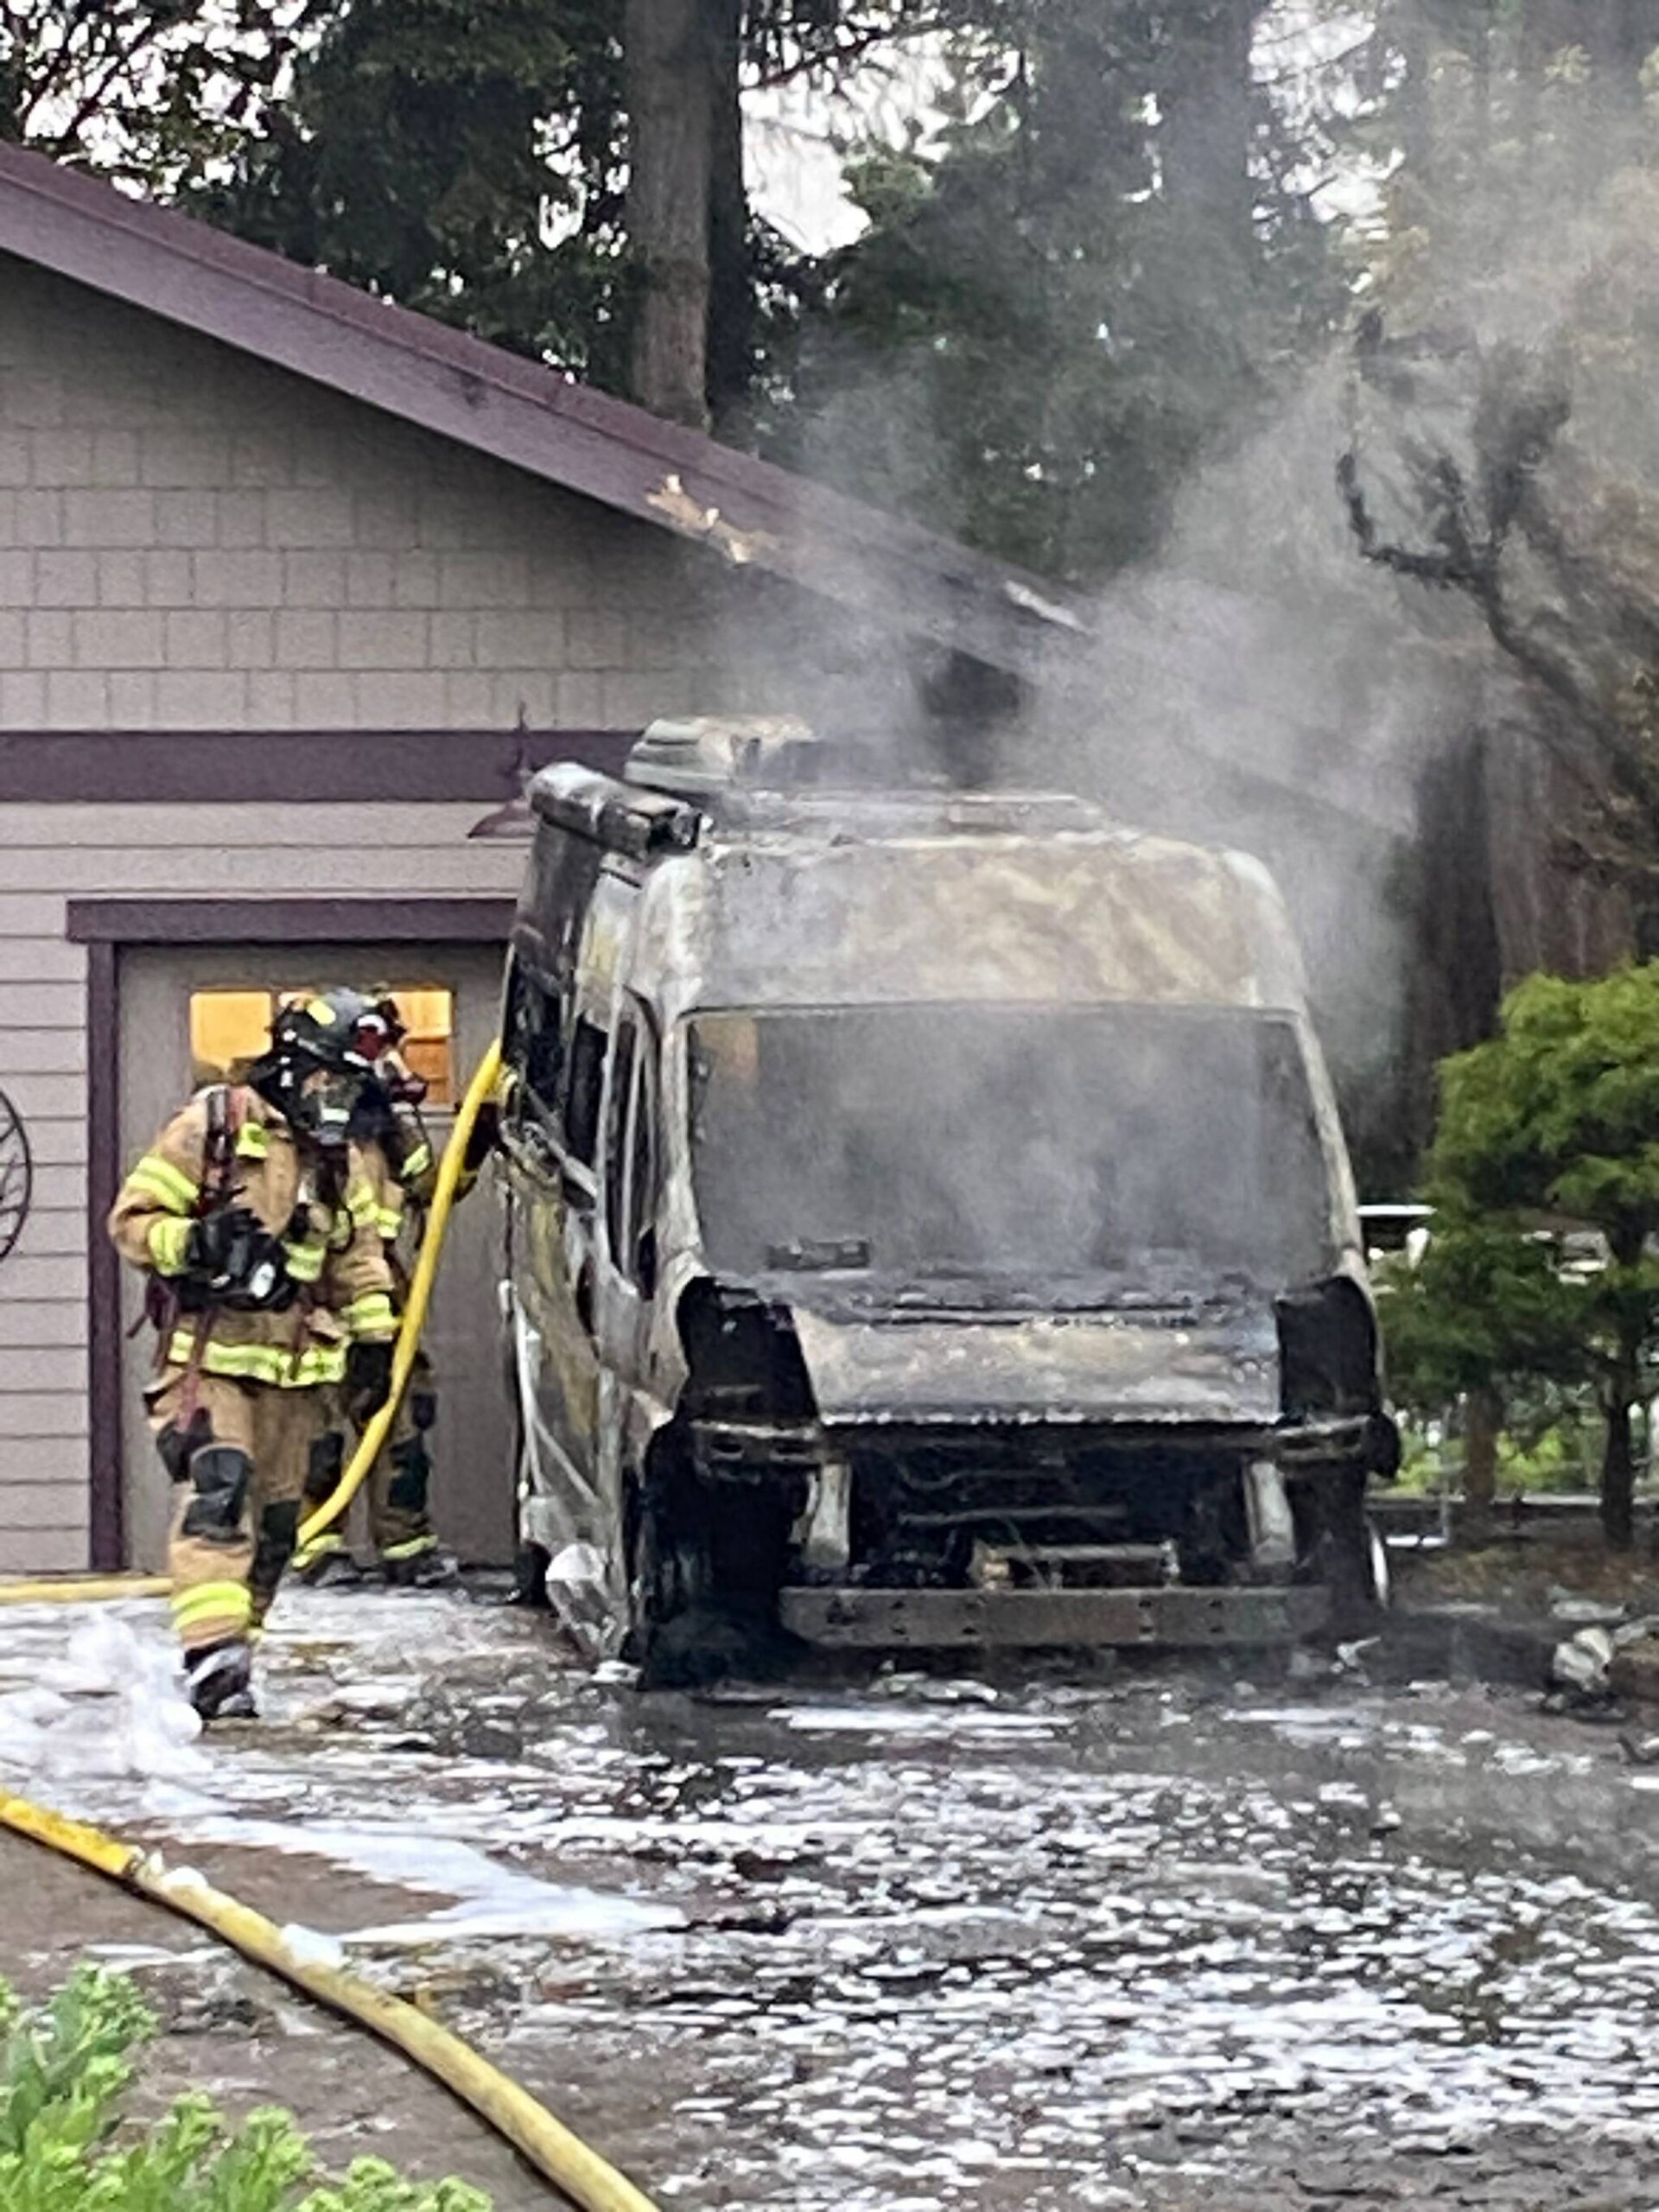 Photo provided by South Whidbey Fire/EMS
Firefighters successfully contained a blaze that originated in an RV from spreading to the nearby home.